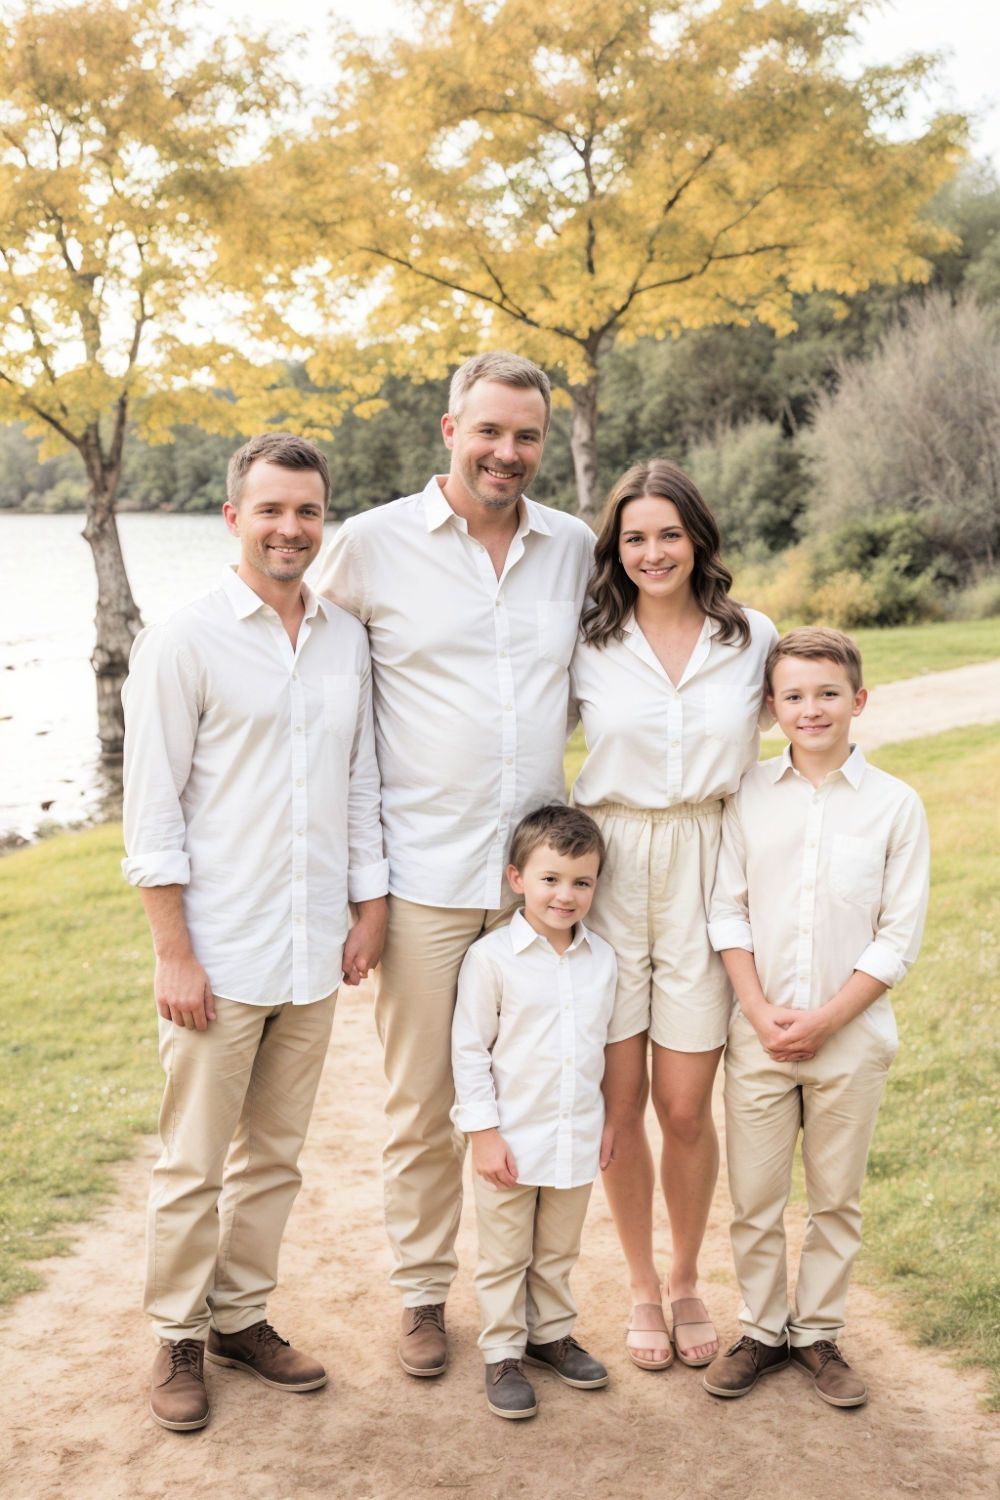 casual in khaki and cream family photo outfit